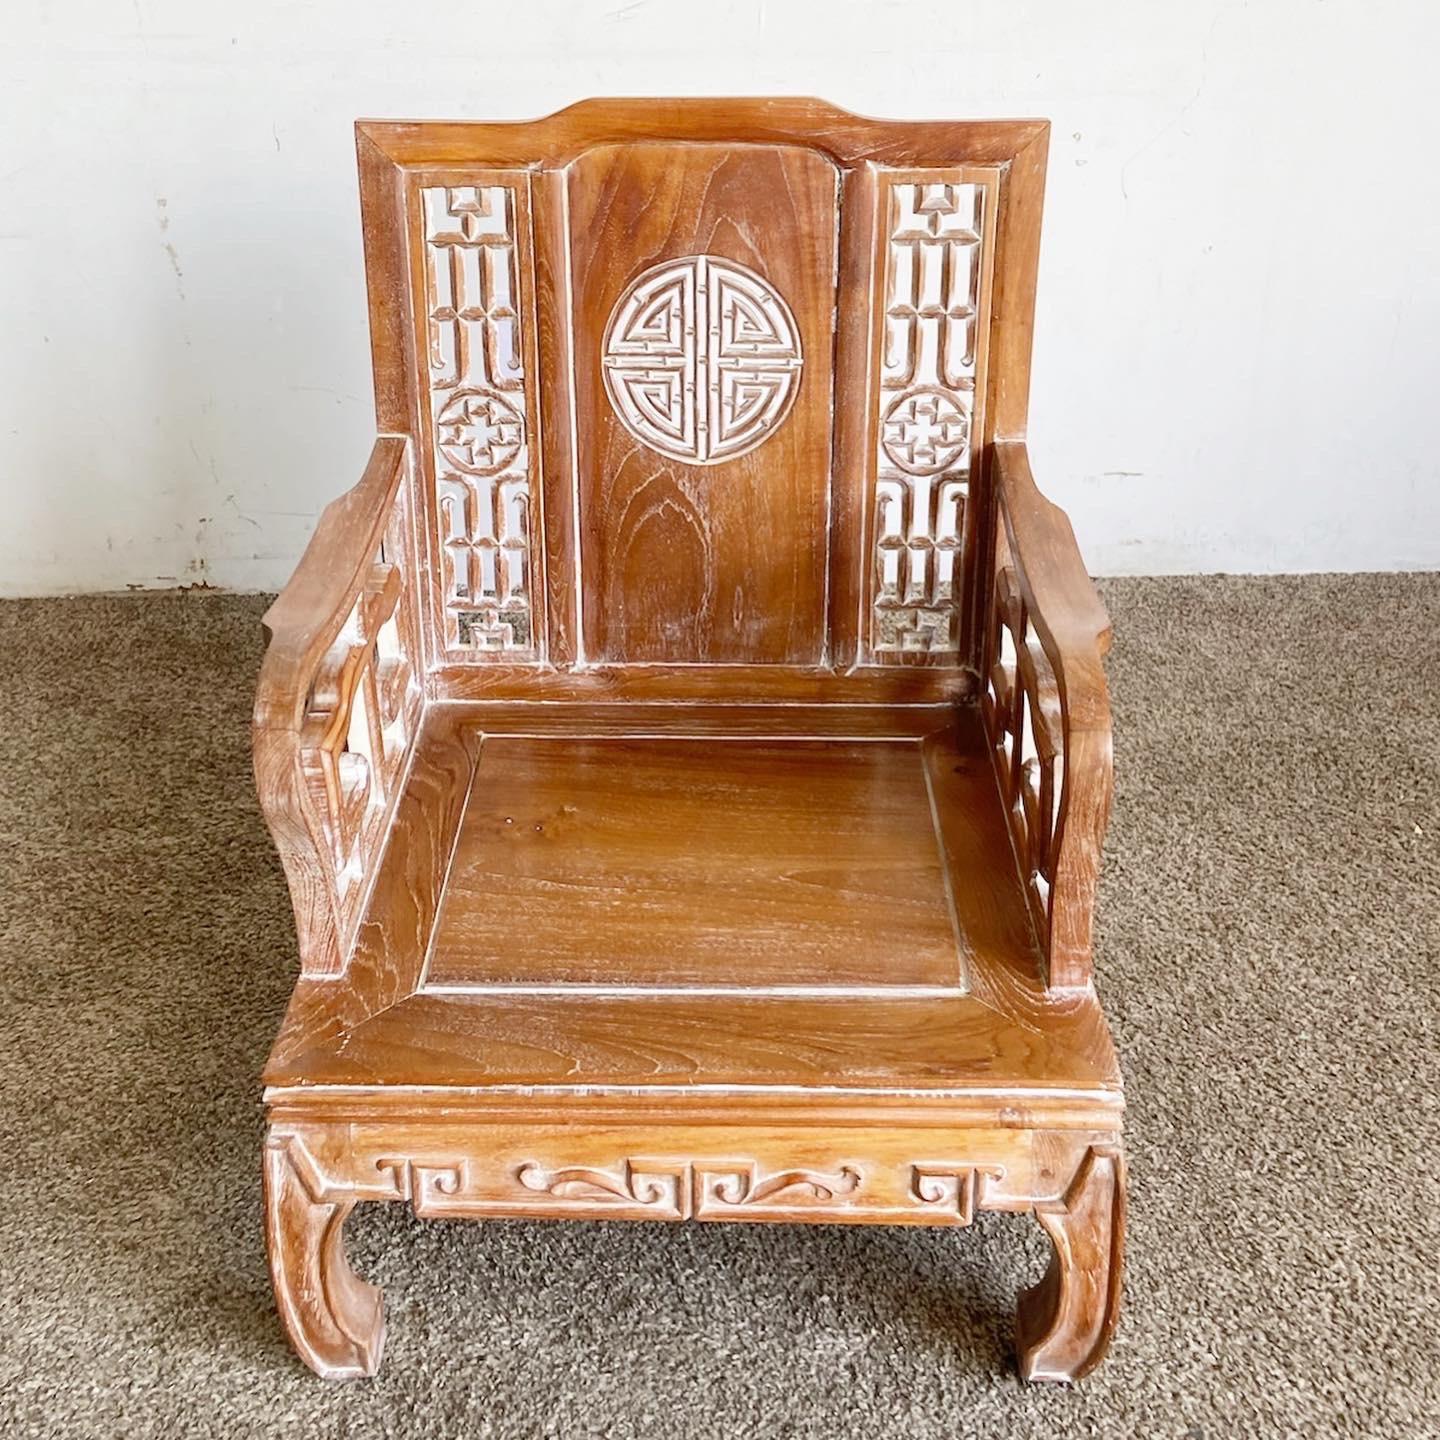 Ming Style Carved Wooden Sofa/Bench With Arm Chair For Sale 3